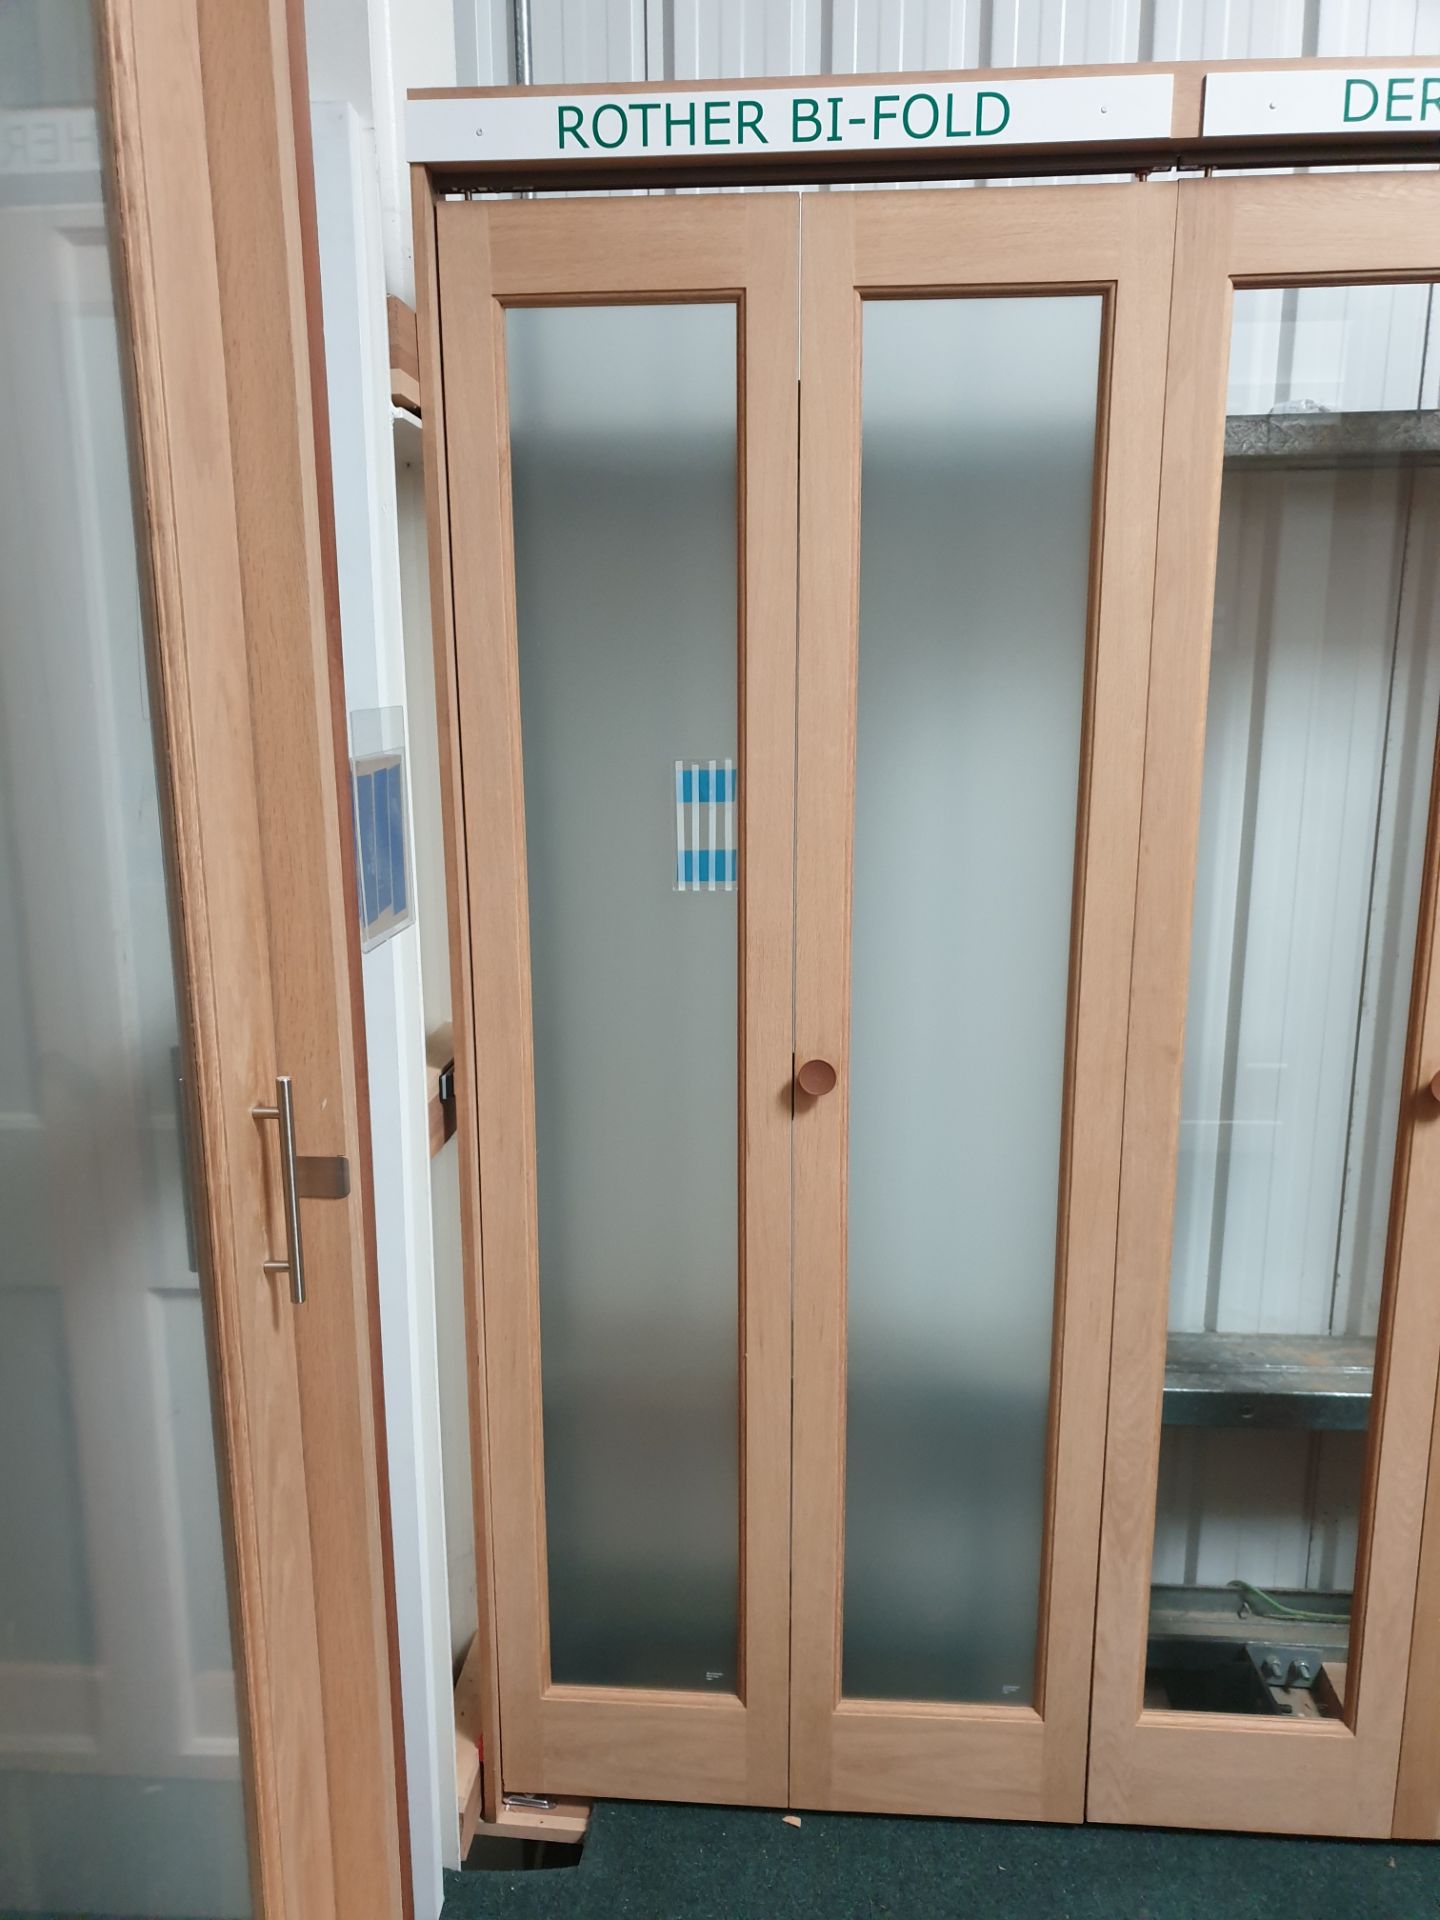 8 x Rother Satin Glazed Bi Fold BFROT30 1936x758x35mm Internal Door - Lots to be handed out in order